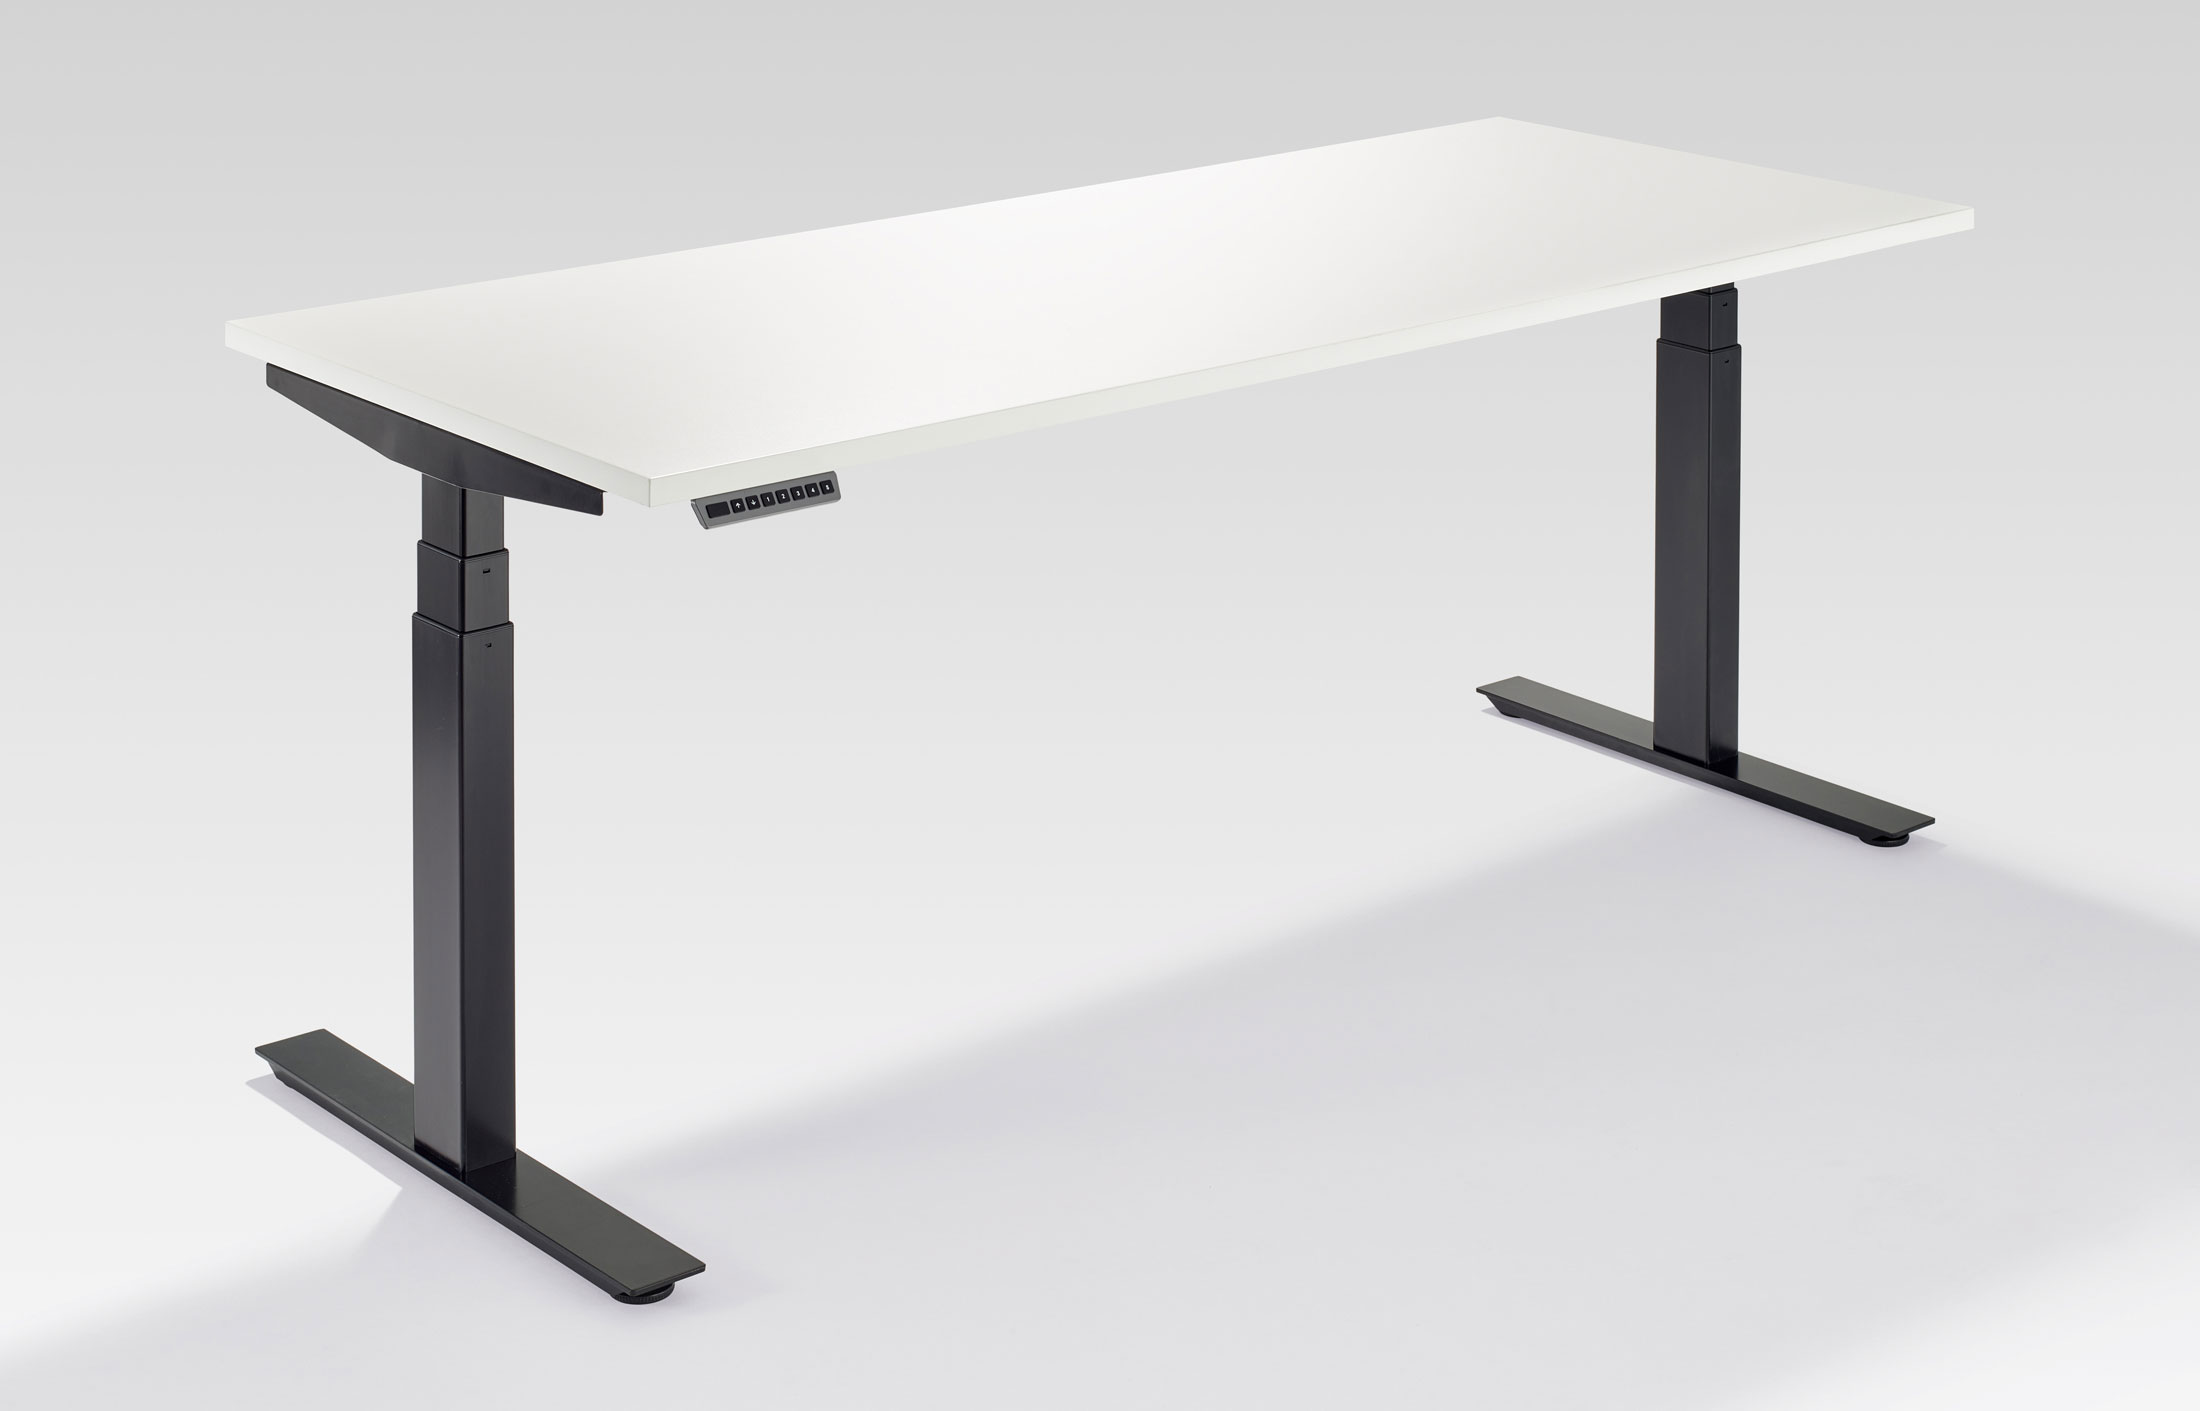 Tayco's Volley Height Adjustable Table- best ergonomic desk solution.